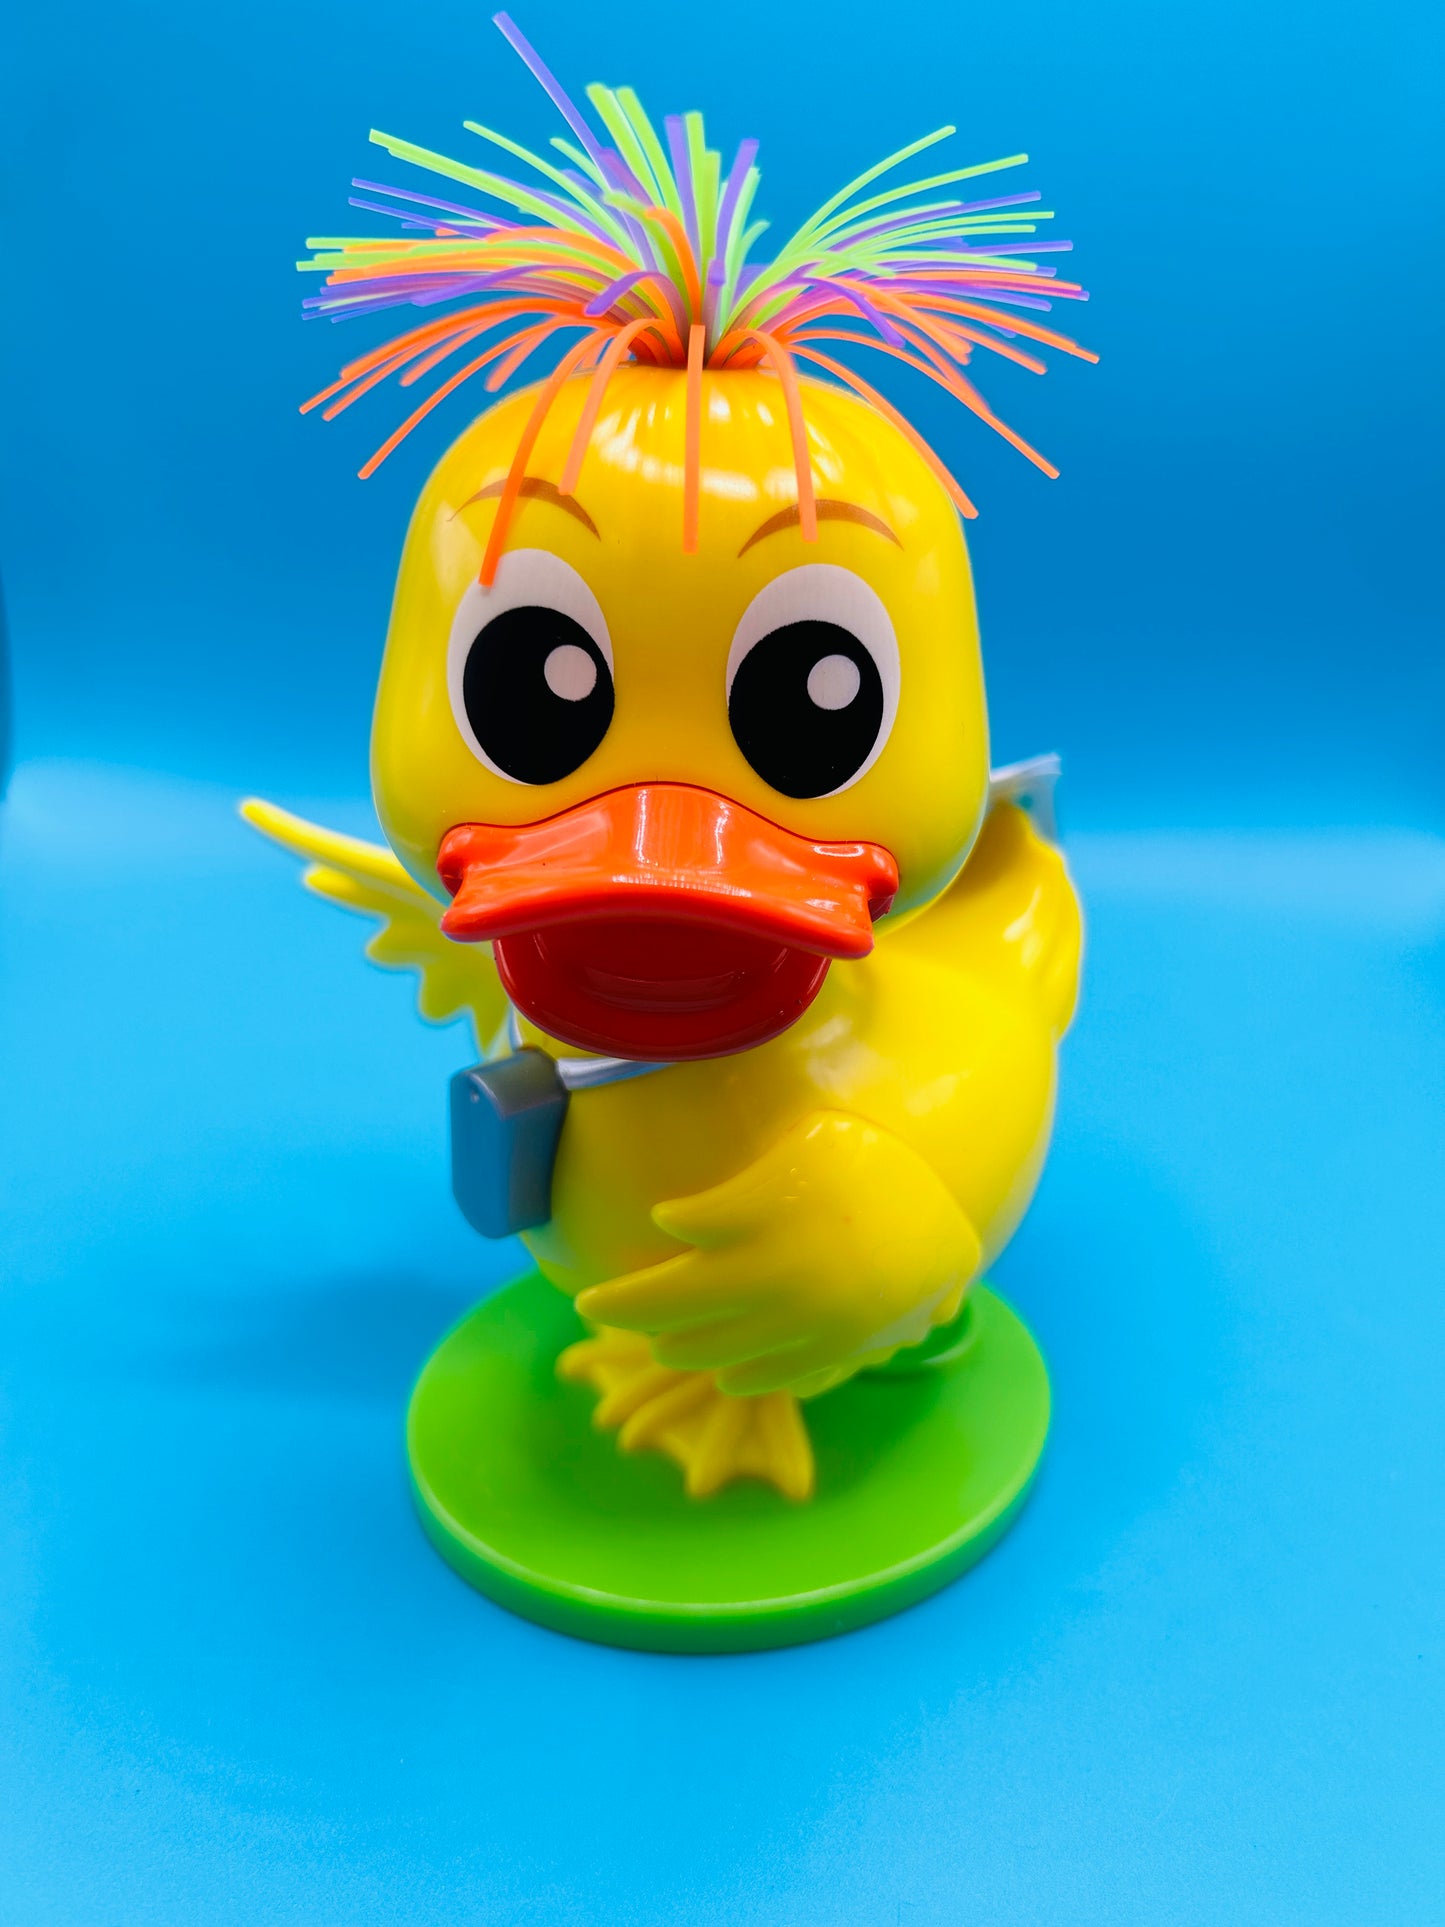 Duck dispenser with candy piece